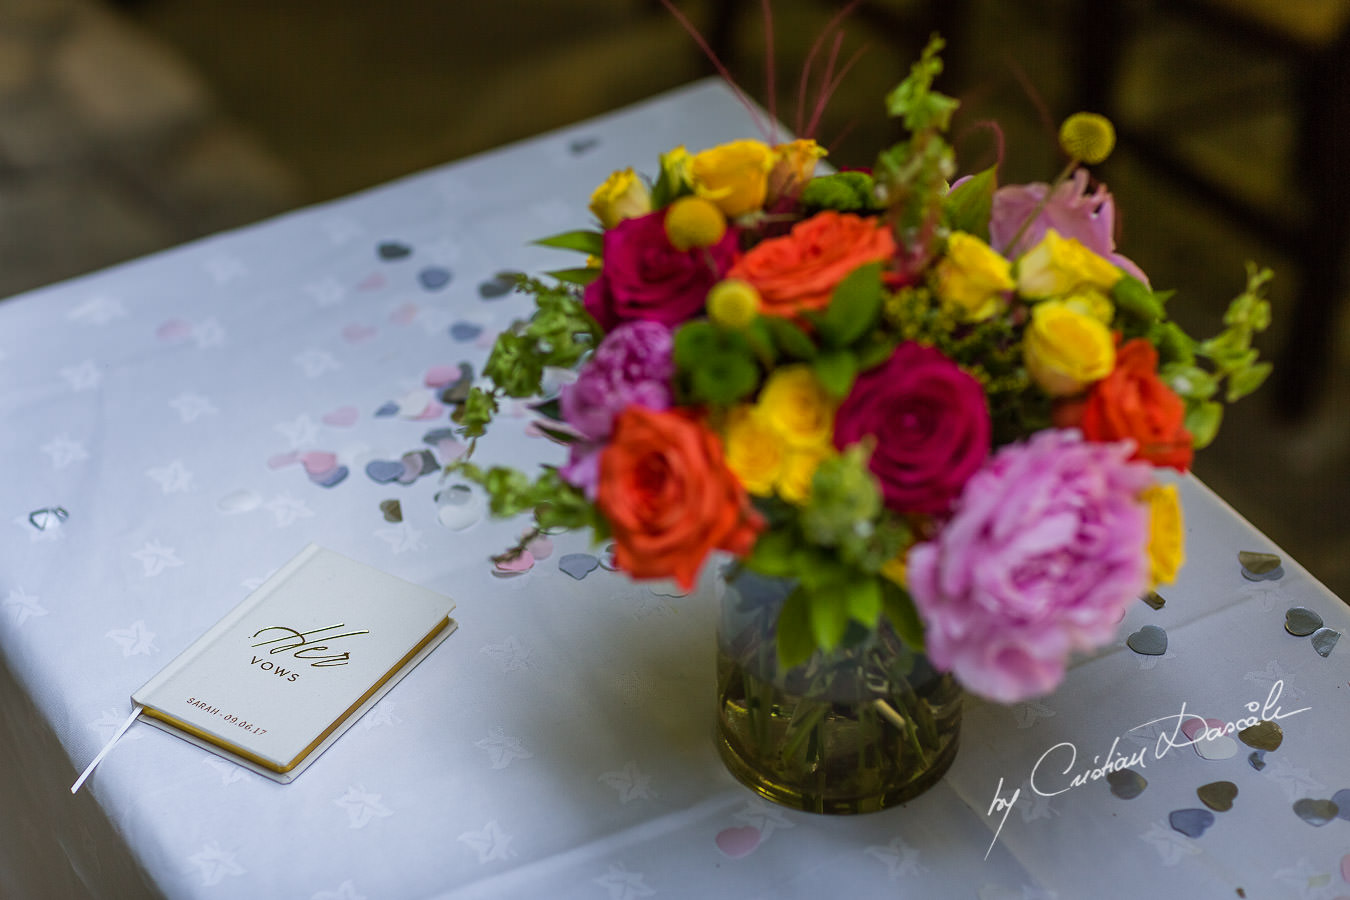 A beautiful wedding day at the Vasilias Nikoklis Inn in Paphos, captured by Cristian Dascalu. The ceremony table.